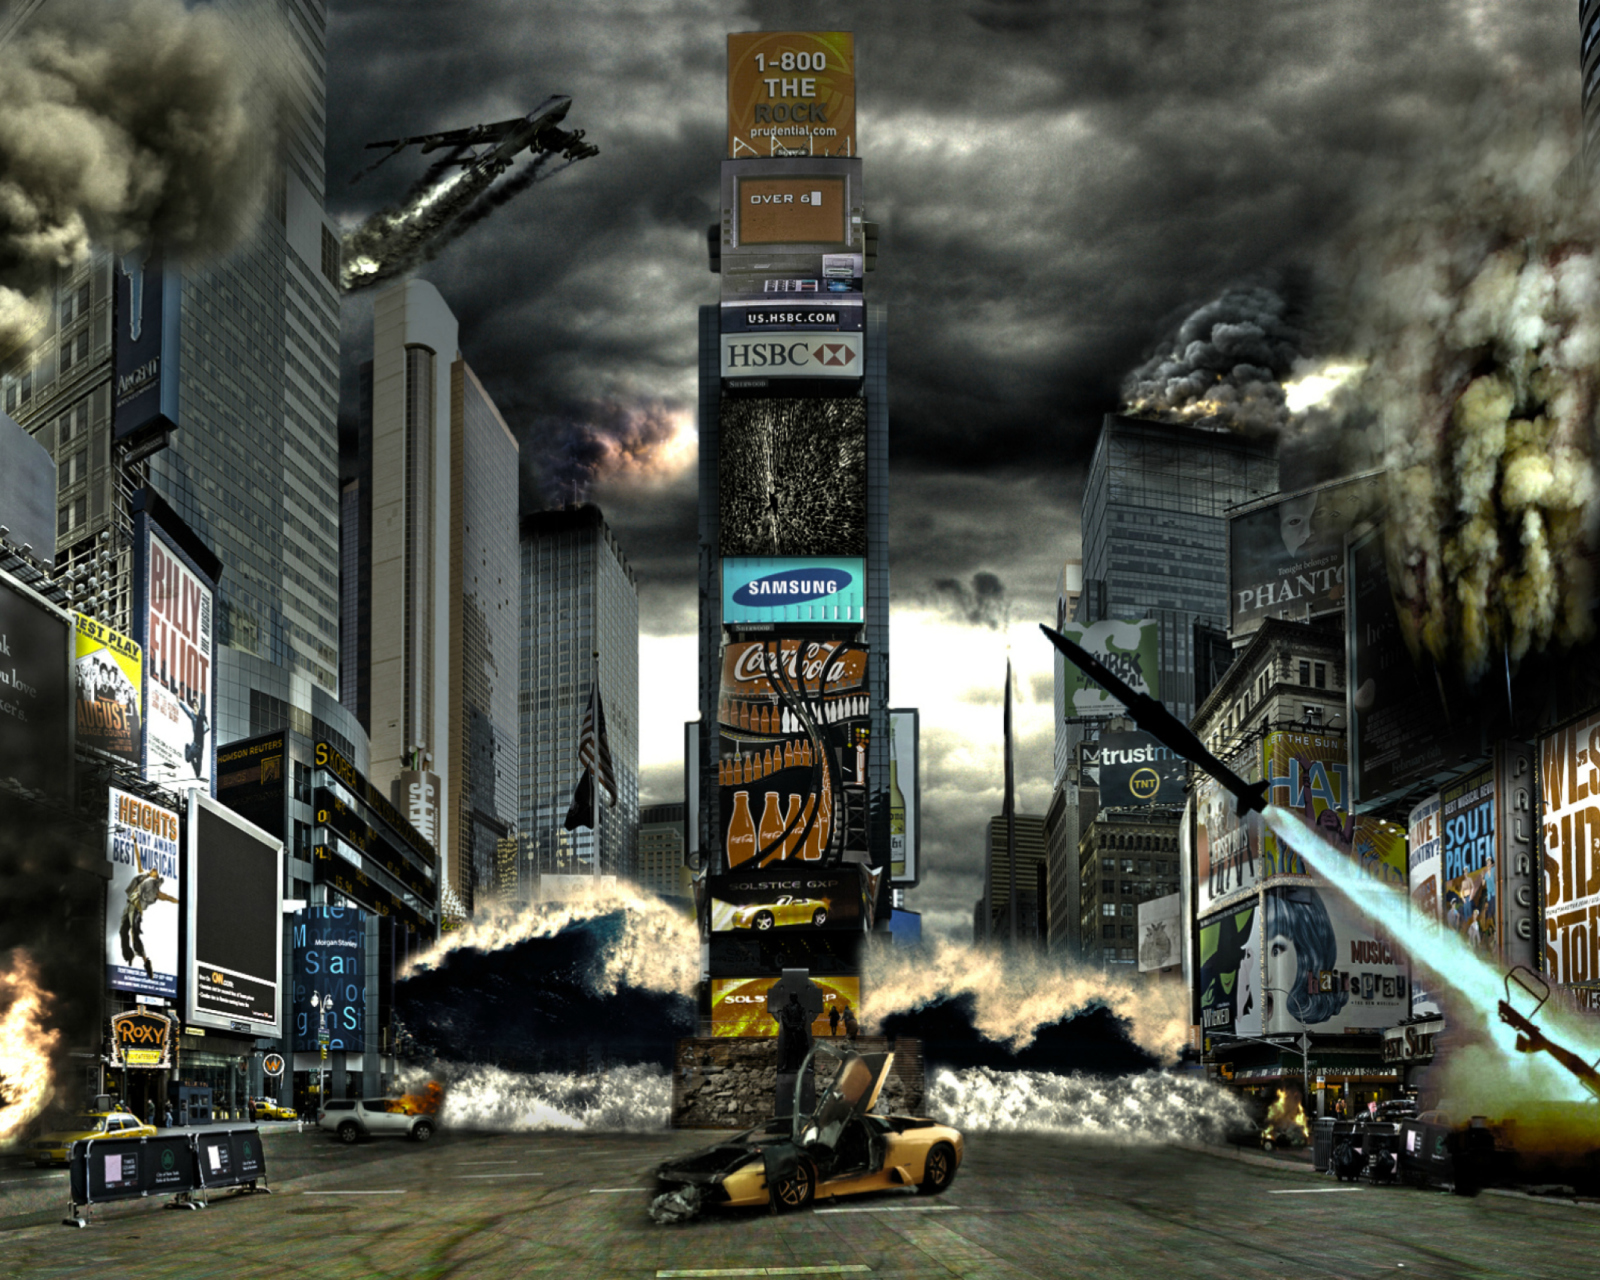 Times Square Disaster wallpaper 1600x1280